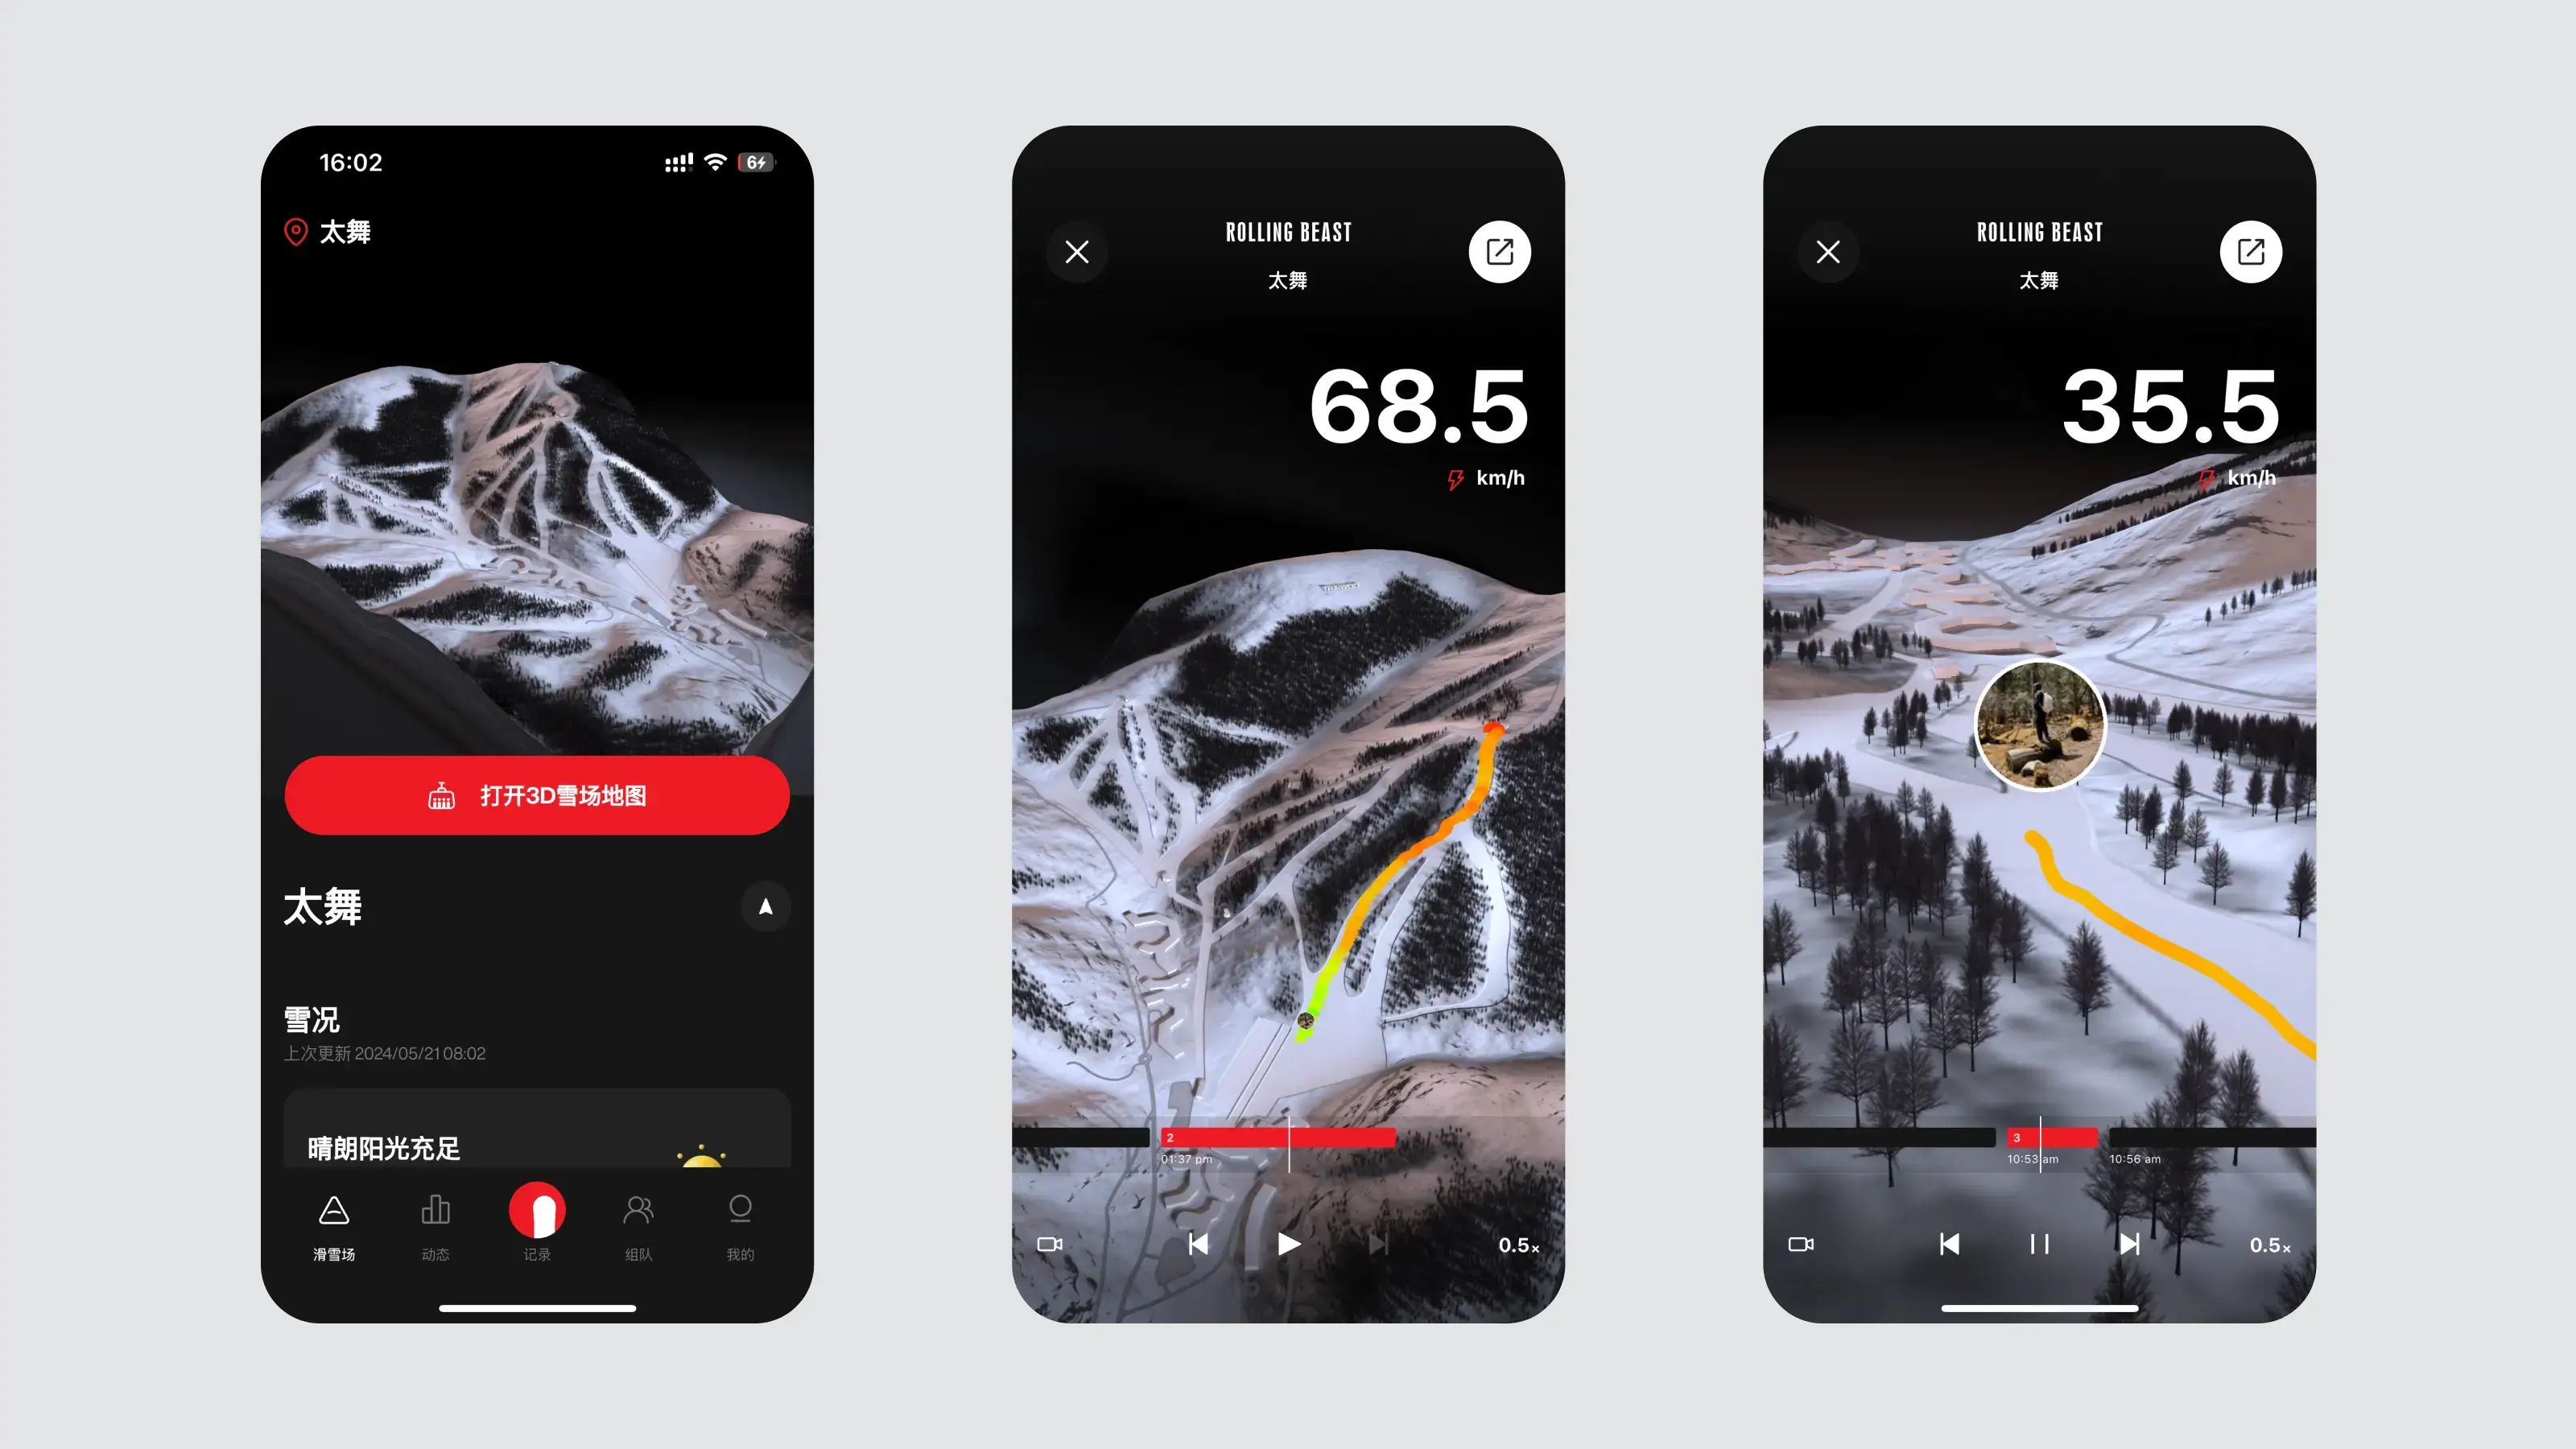 Rolling Beast ski tracking app features and interface